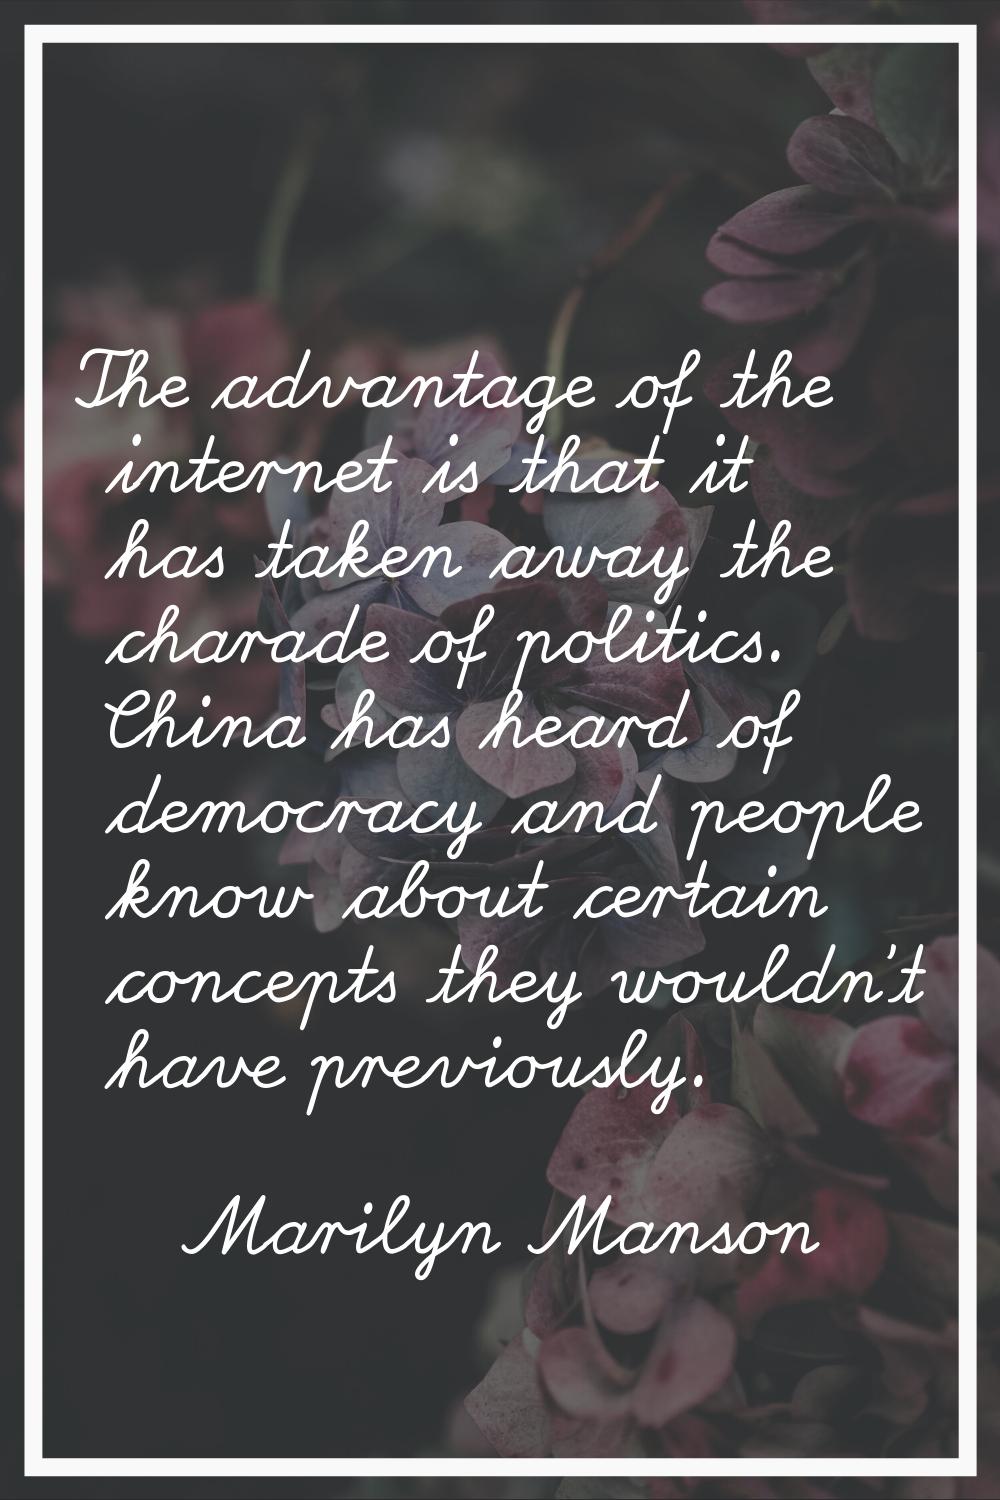 The advantage of the internet is that it has taken away the charade of politics. China has heard of